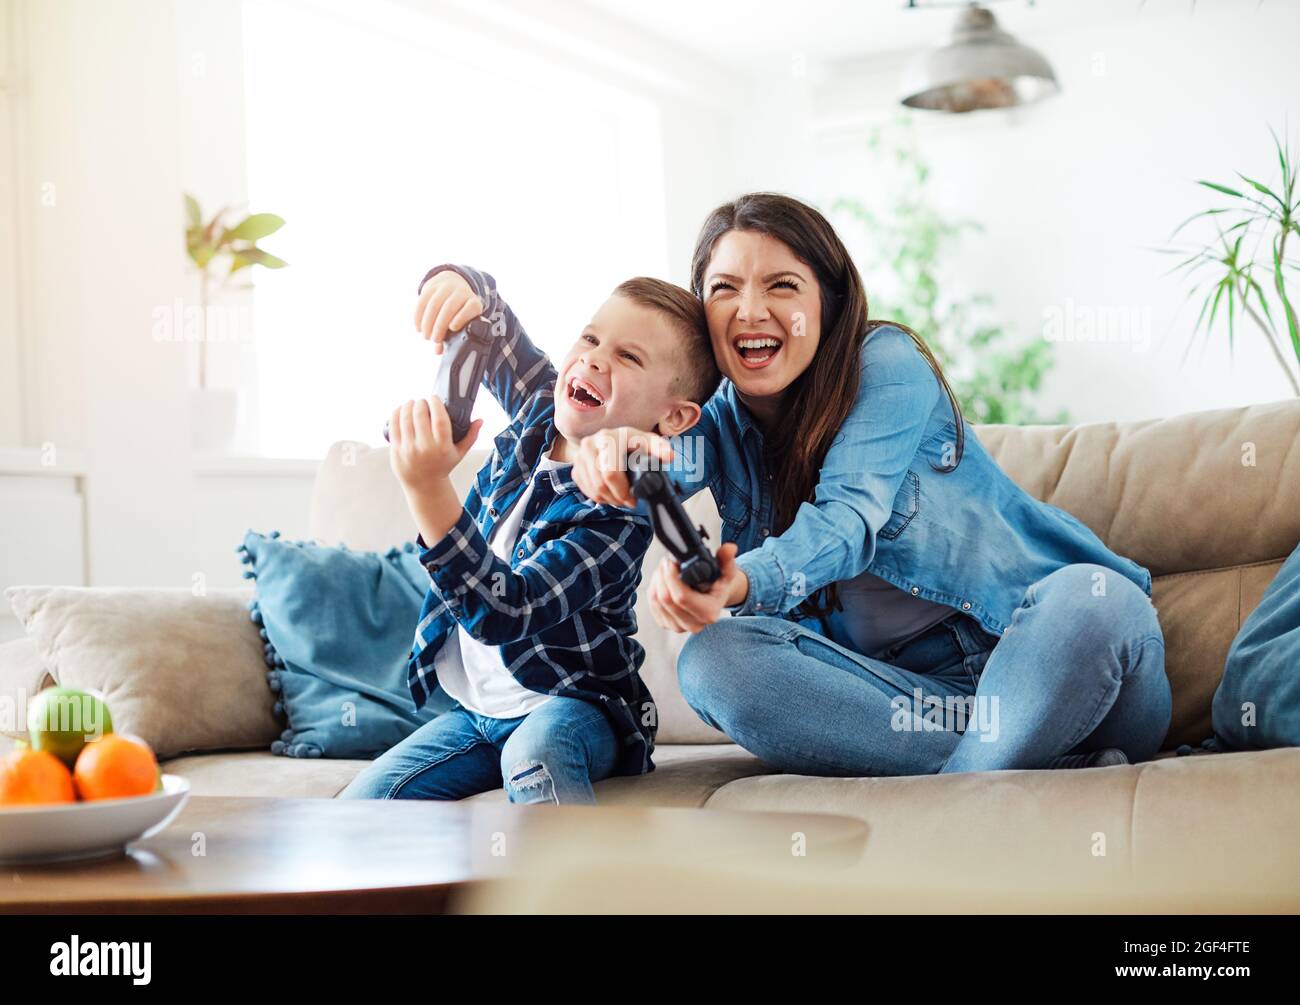 child son mother family happy playing console kid childhood joystick cotroller Stock Photo